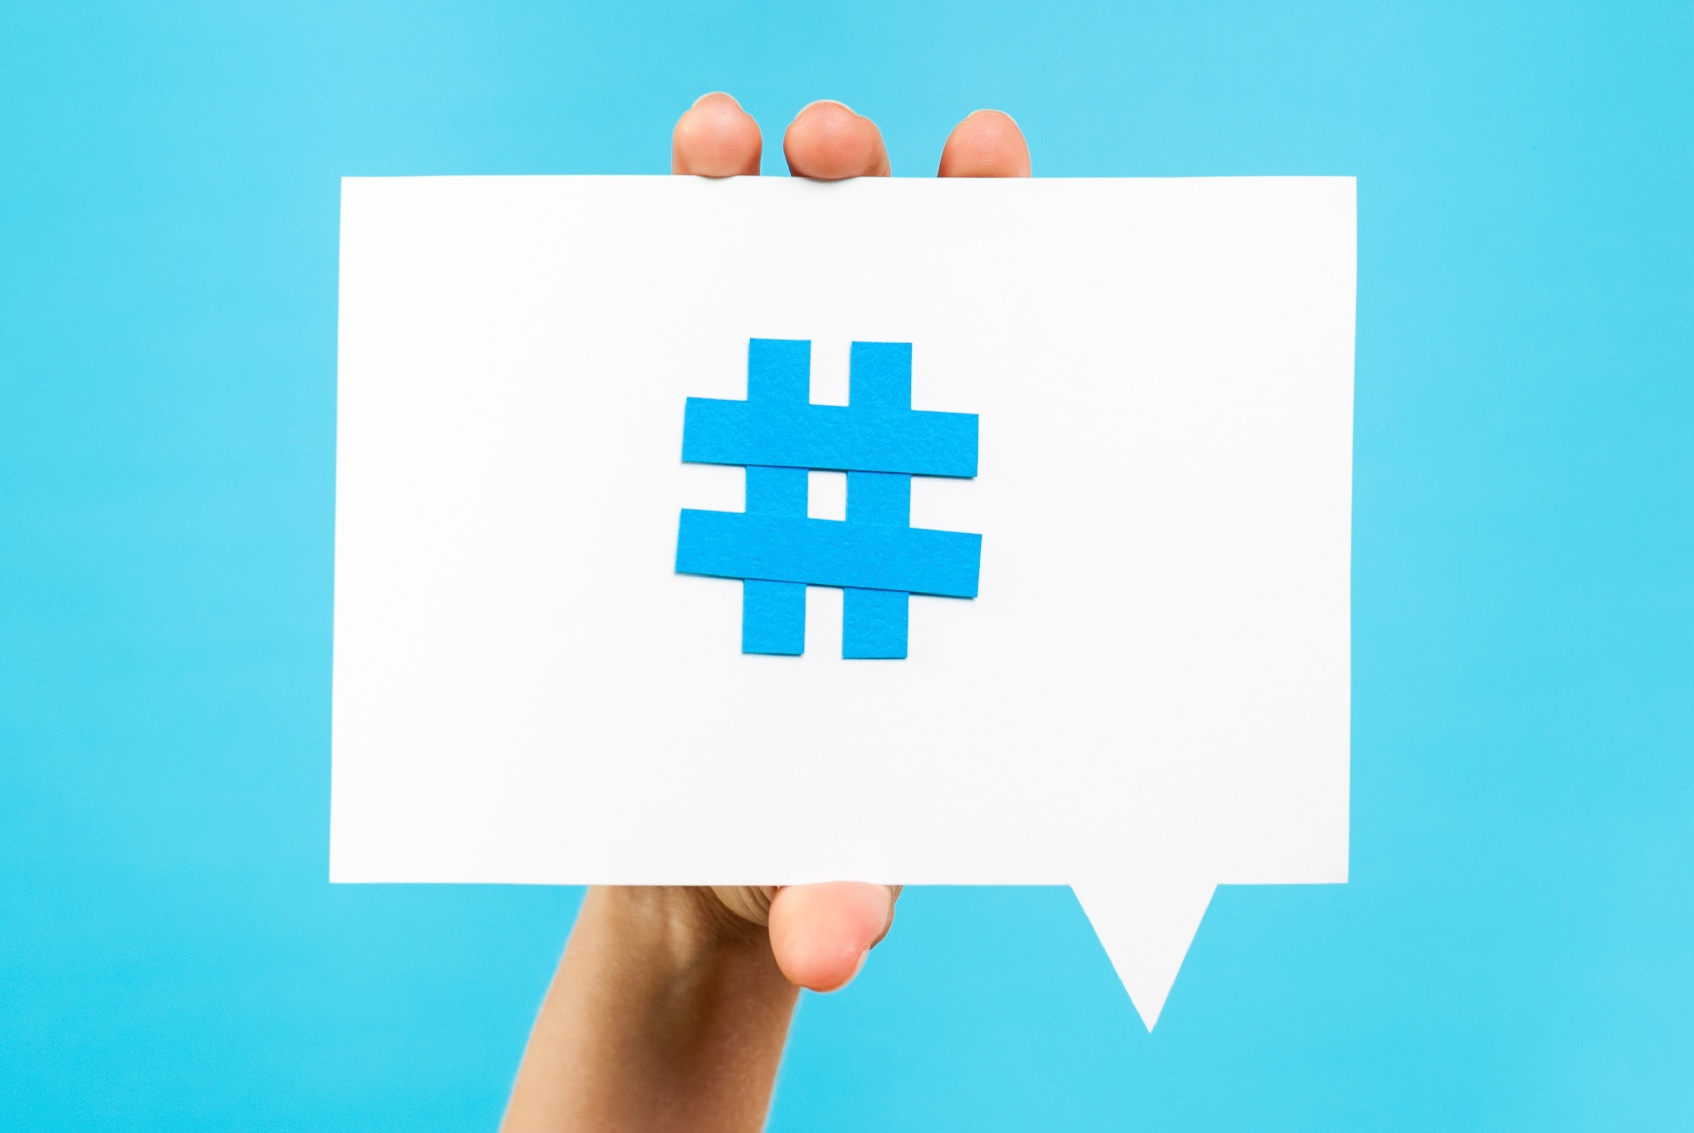 Twitter hashtags will help you locate new followers in your industry